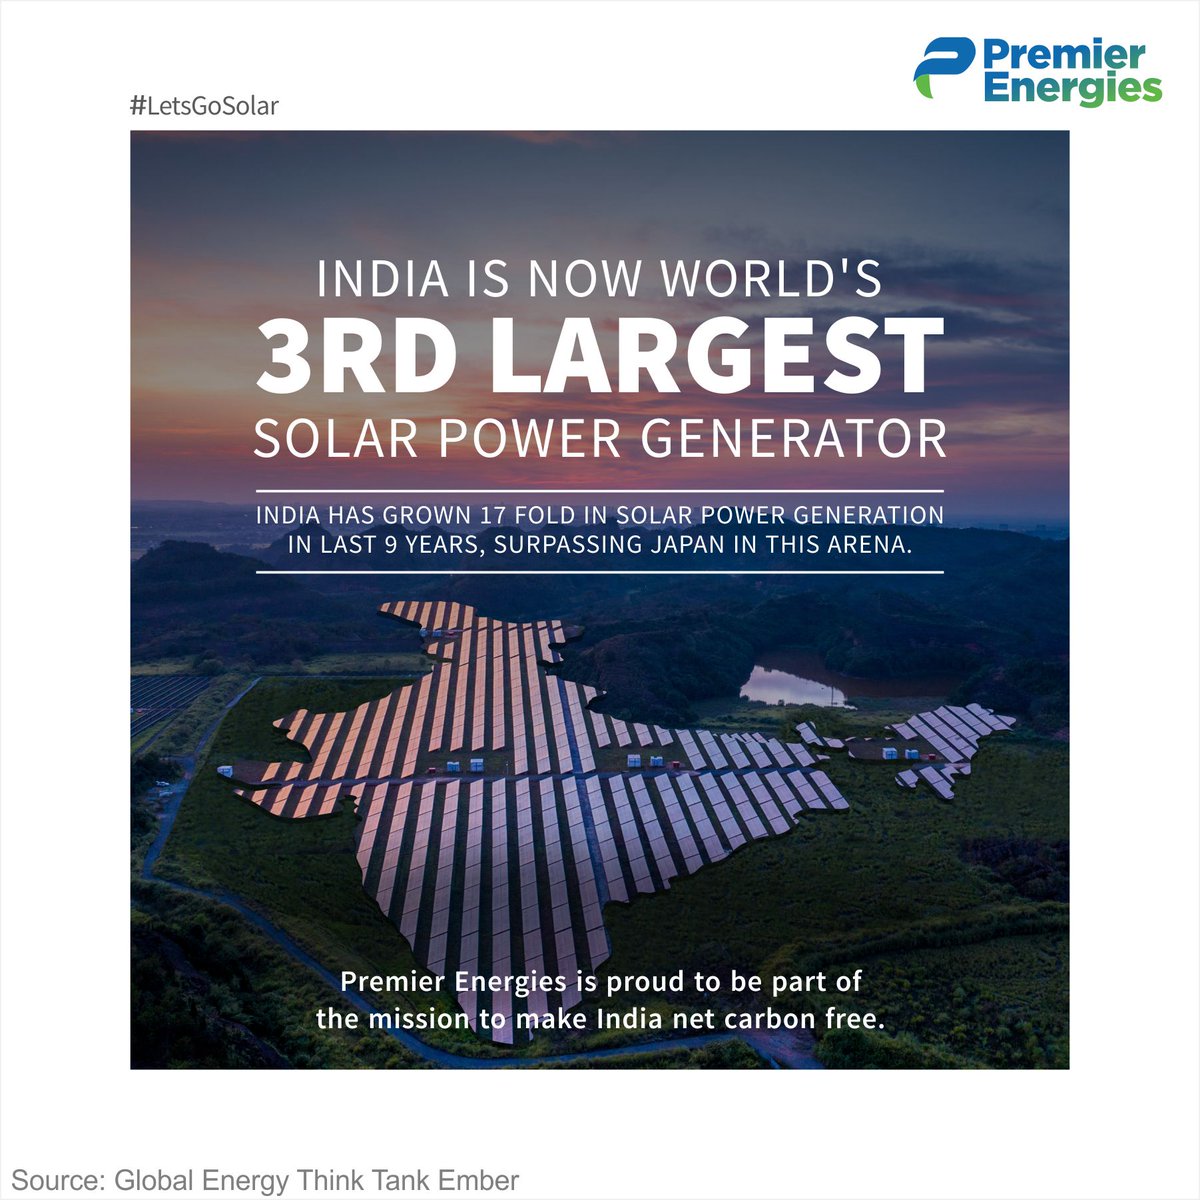 India has surpassed Japan to become the world’s third largest solar power generator, as per a report from global energy think tank Ember.

#LetsGoSolar #PremierEnergies #SolarEnergy #SolarPanel #SolarPower  #SolarIndustry #SustainablePractices #GreenFuture #RenewableIndia